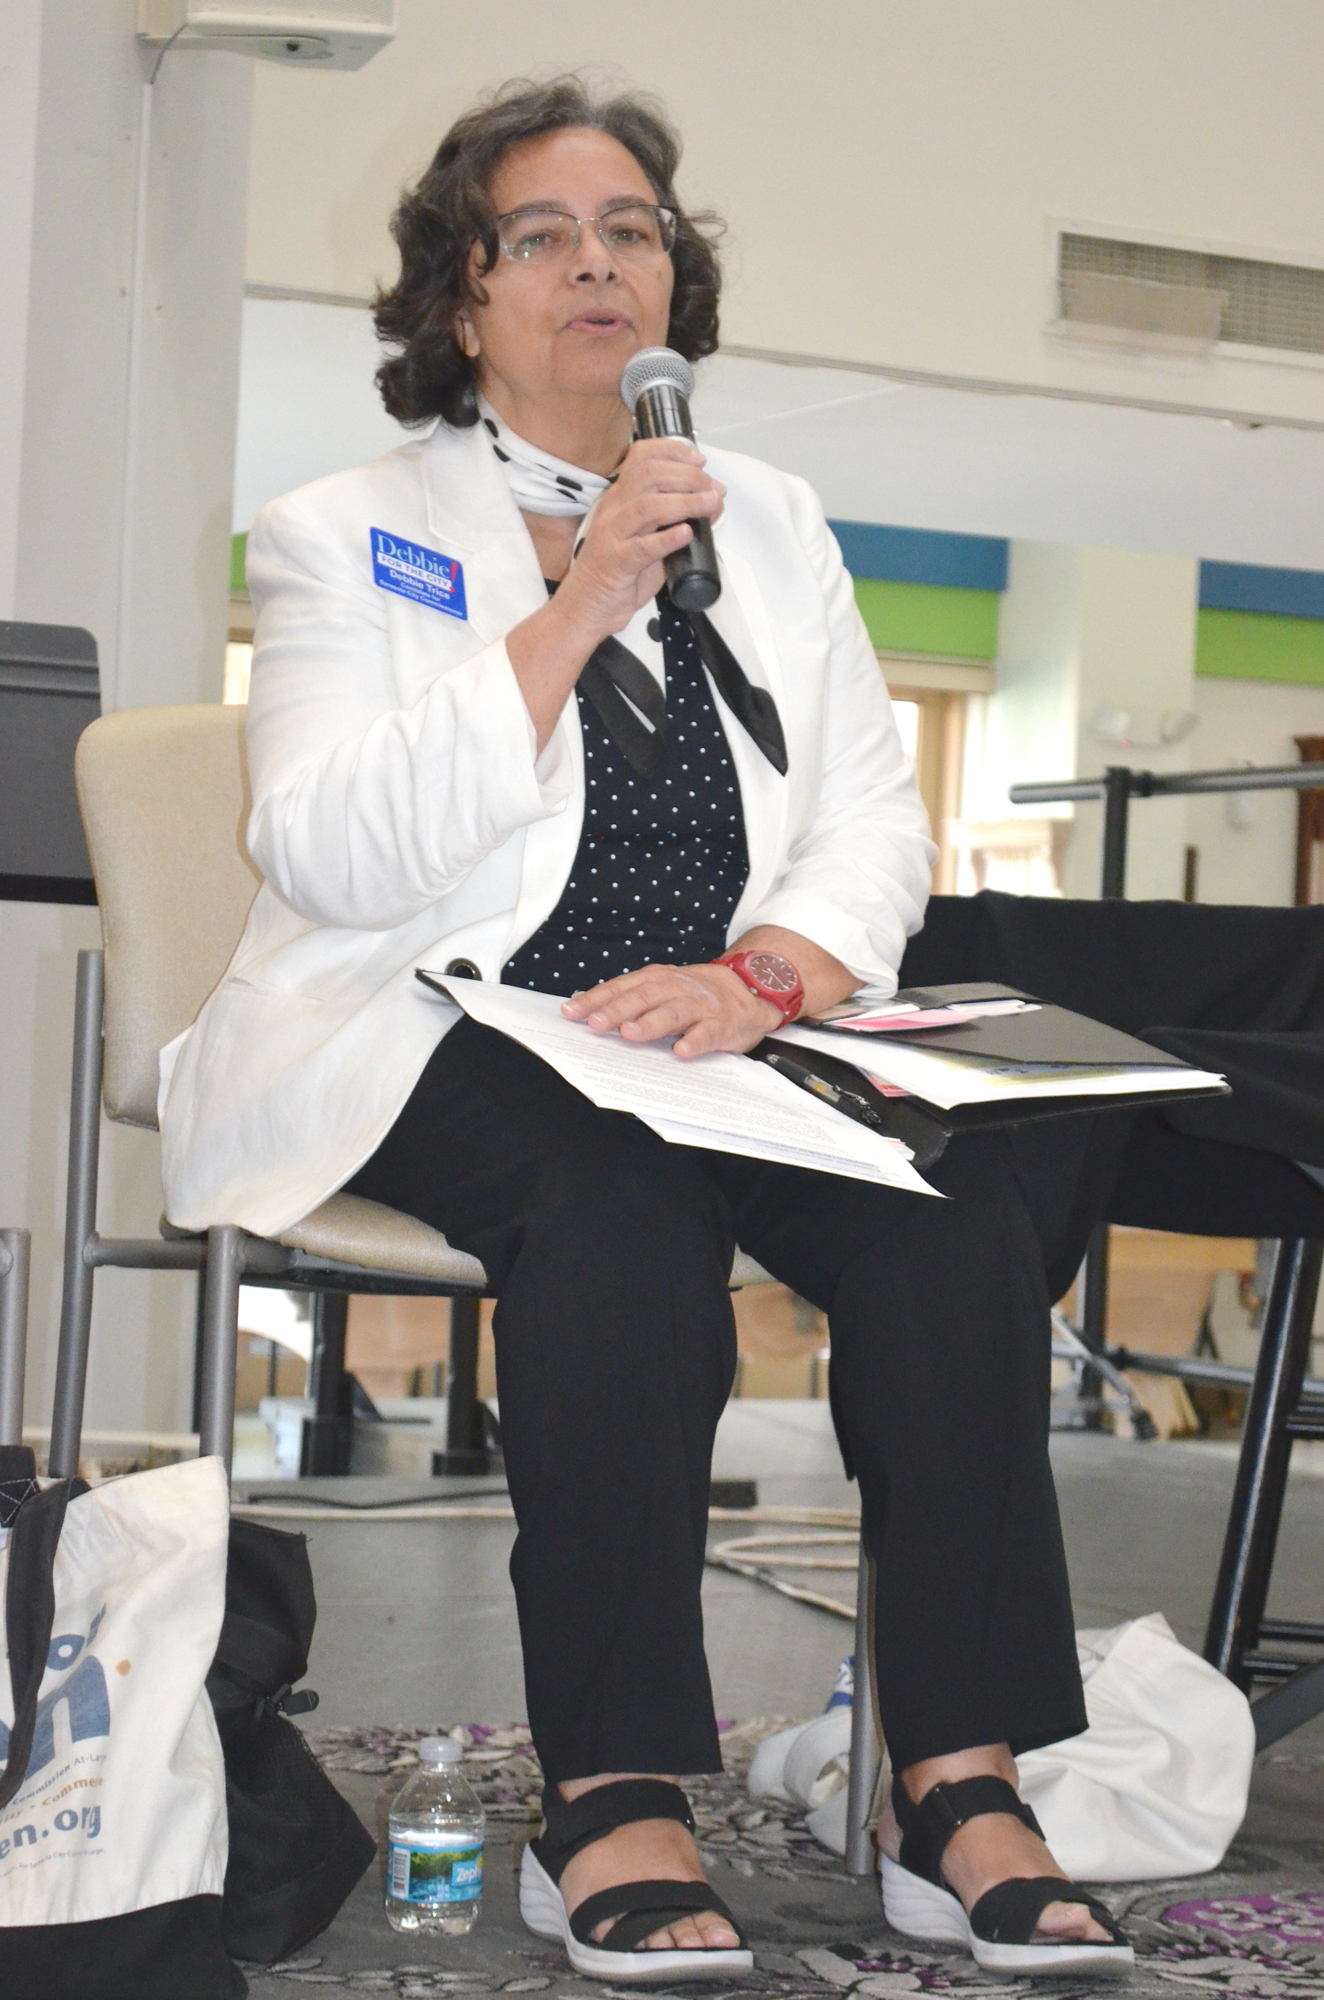 Speaking at a candidate forum, Debbie Trice narrowly defeated Dan Lobeck for one of two Sarasota City Commission at-large seats. (Andrew Warfield)